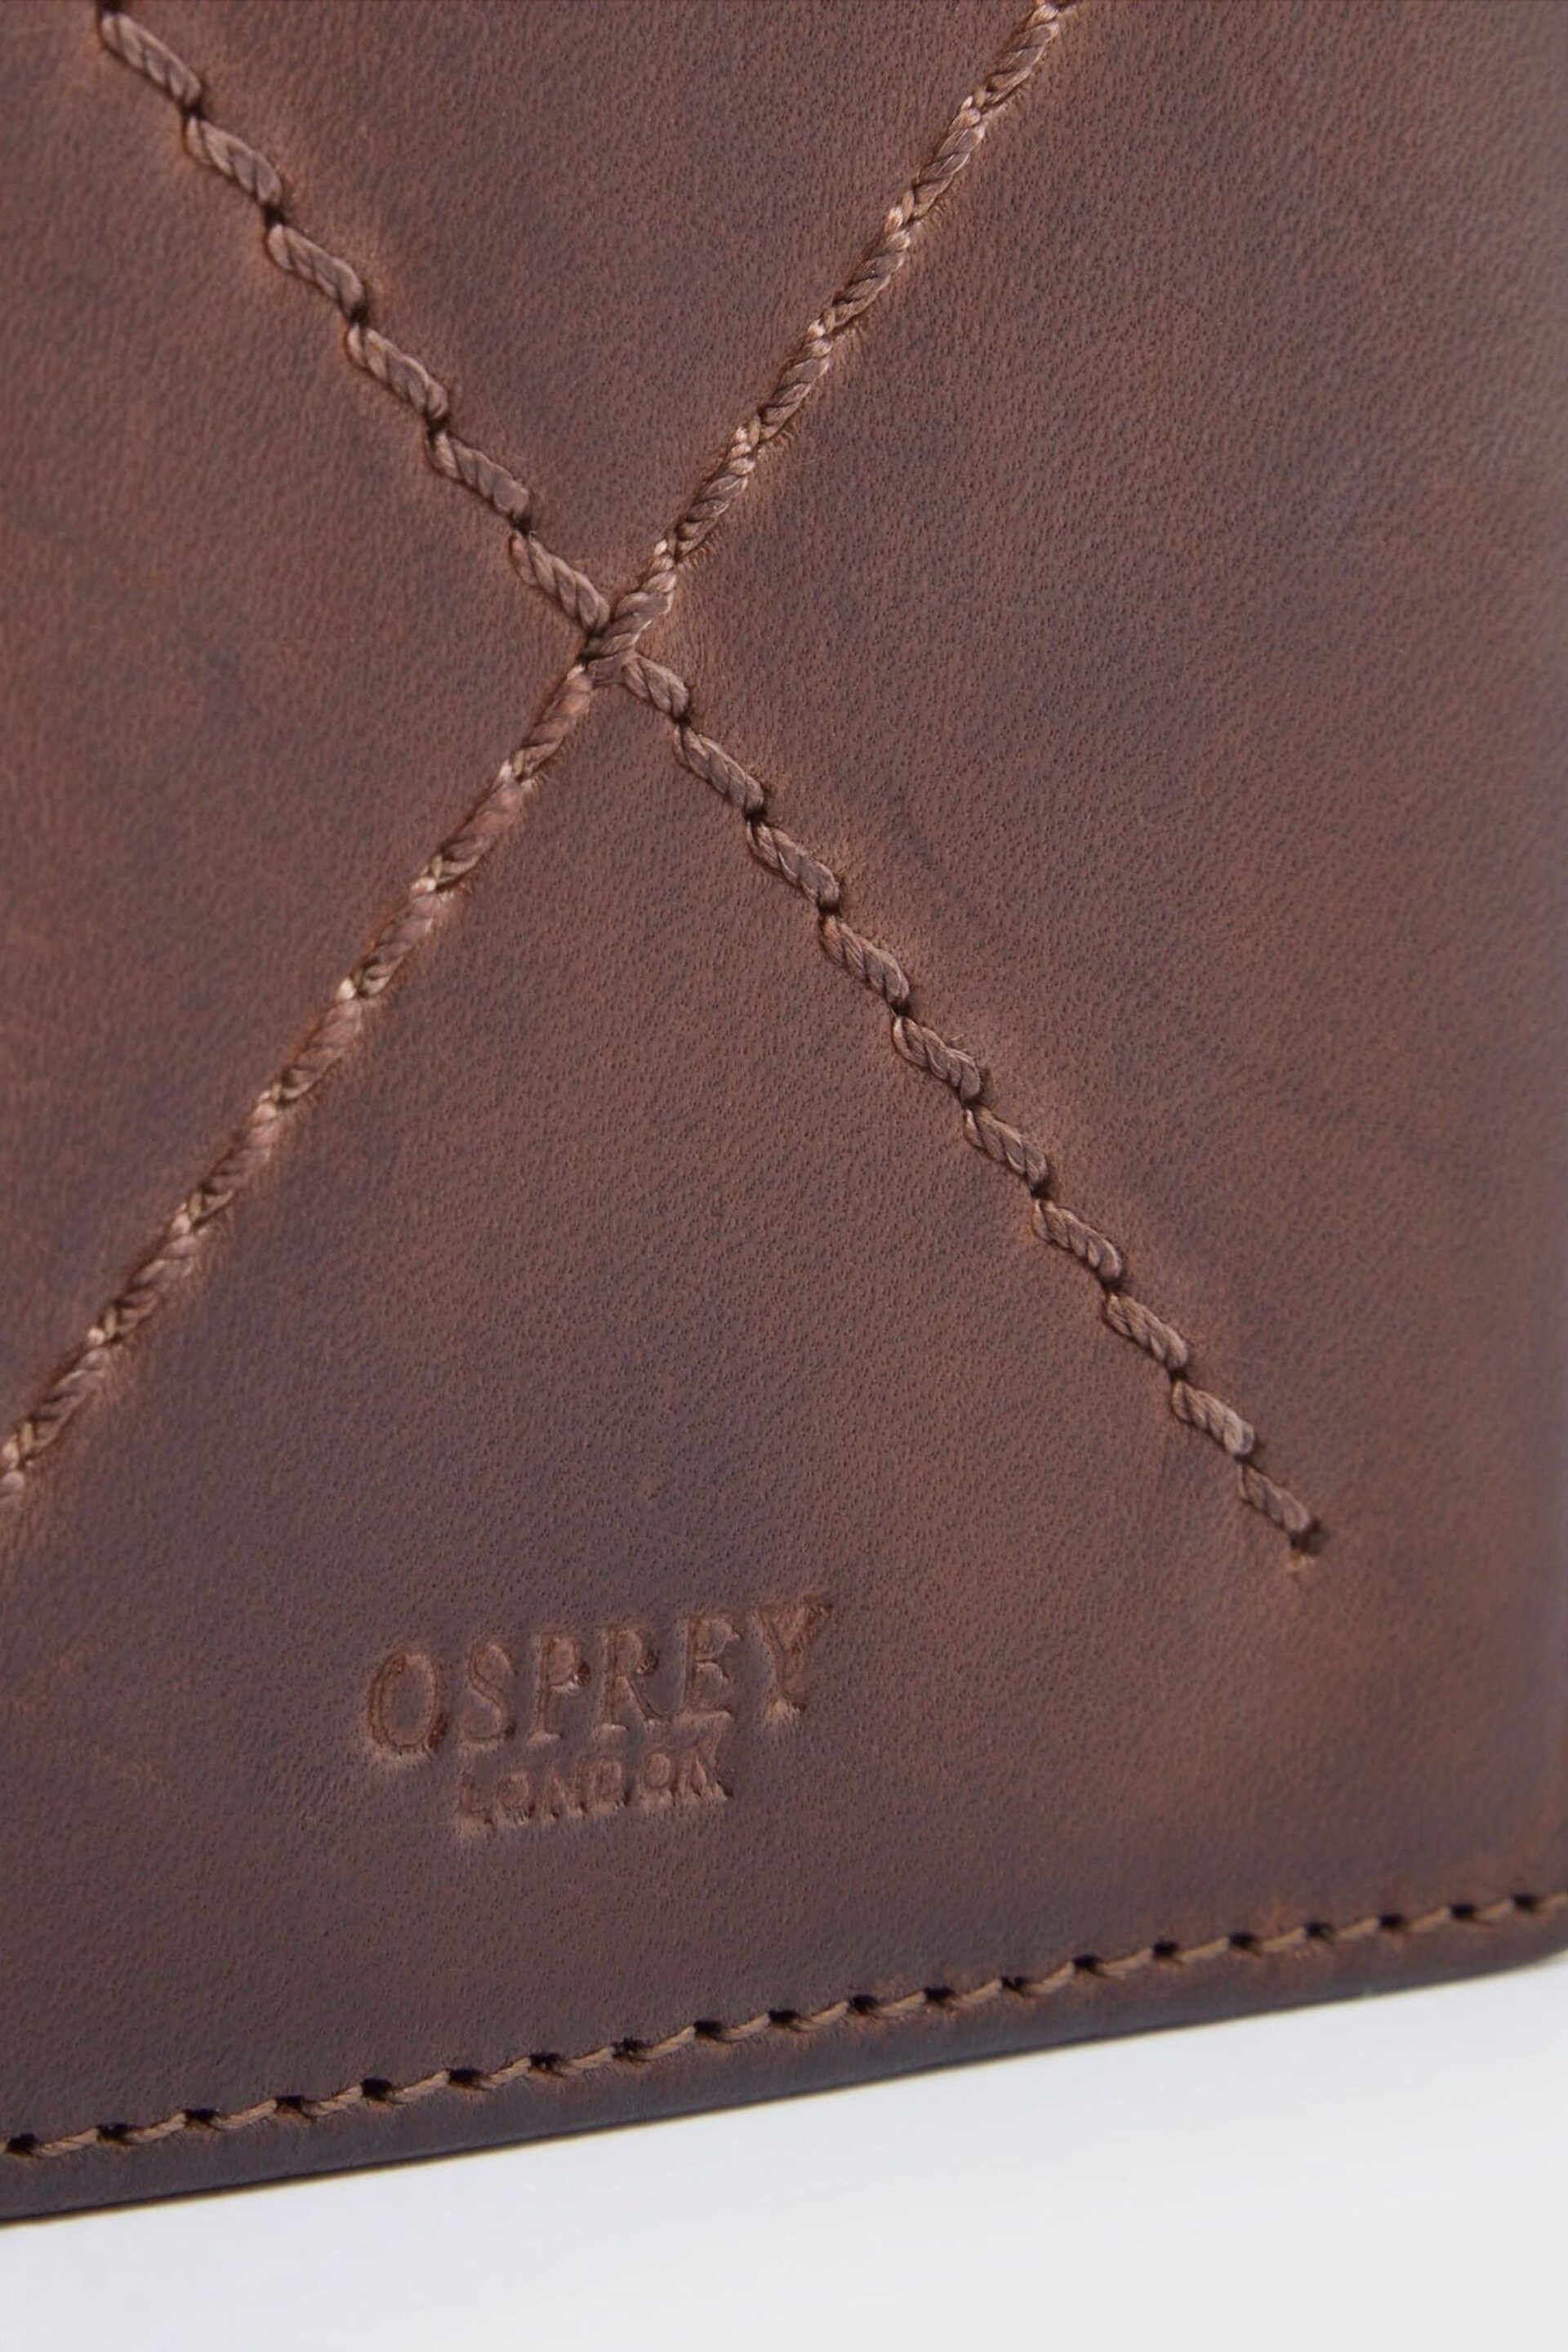 OSPREY LONDON The X Stitch Leather RFID ID Cardholder Brown Wallet - Image 6 of 6